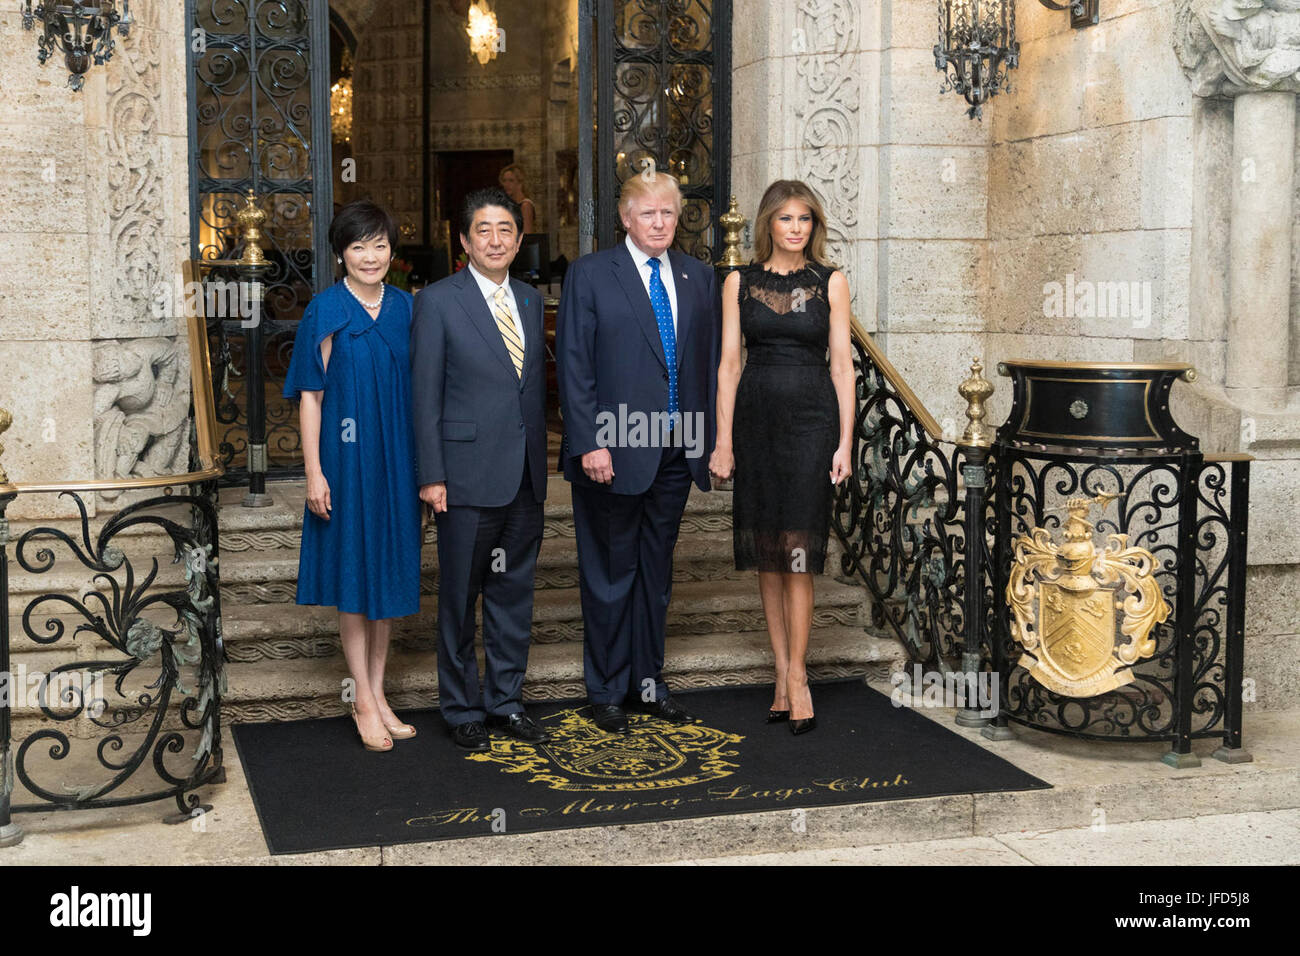 President Donald Trump and First Lady Melania Trump, are joined by Japanese Prime Minister Shinzō Abe, and his wife, Mrs. Akie Abe, as they pose for photos Saturday, Feb. 11, 2017, at Mar-a-Lago in Palm Beach, FL. (Official White House Photo by Shealah Craighead) Stock Photo